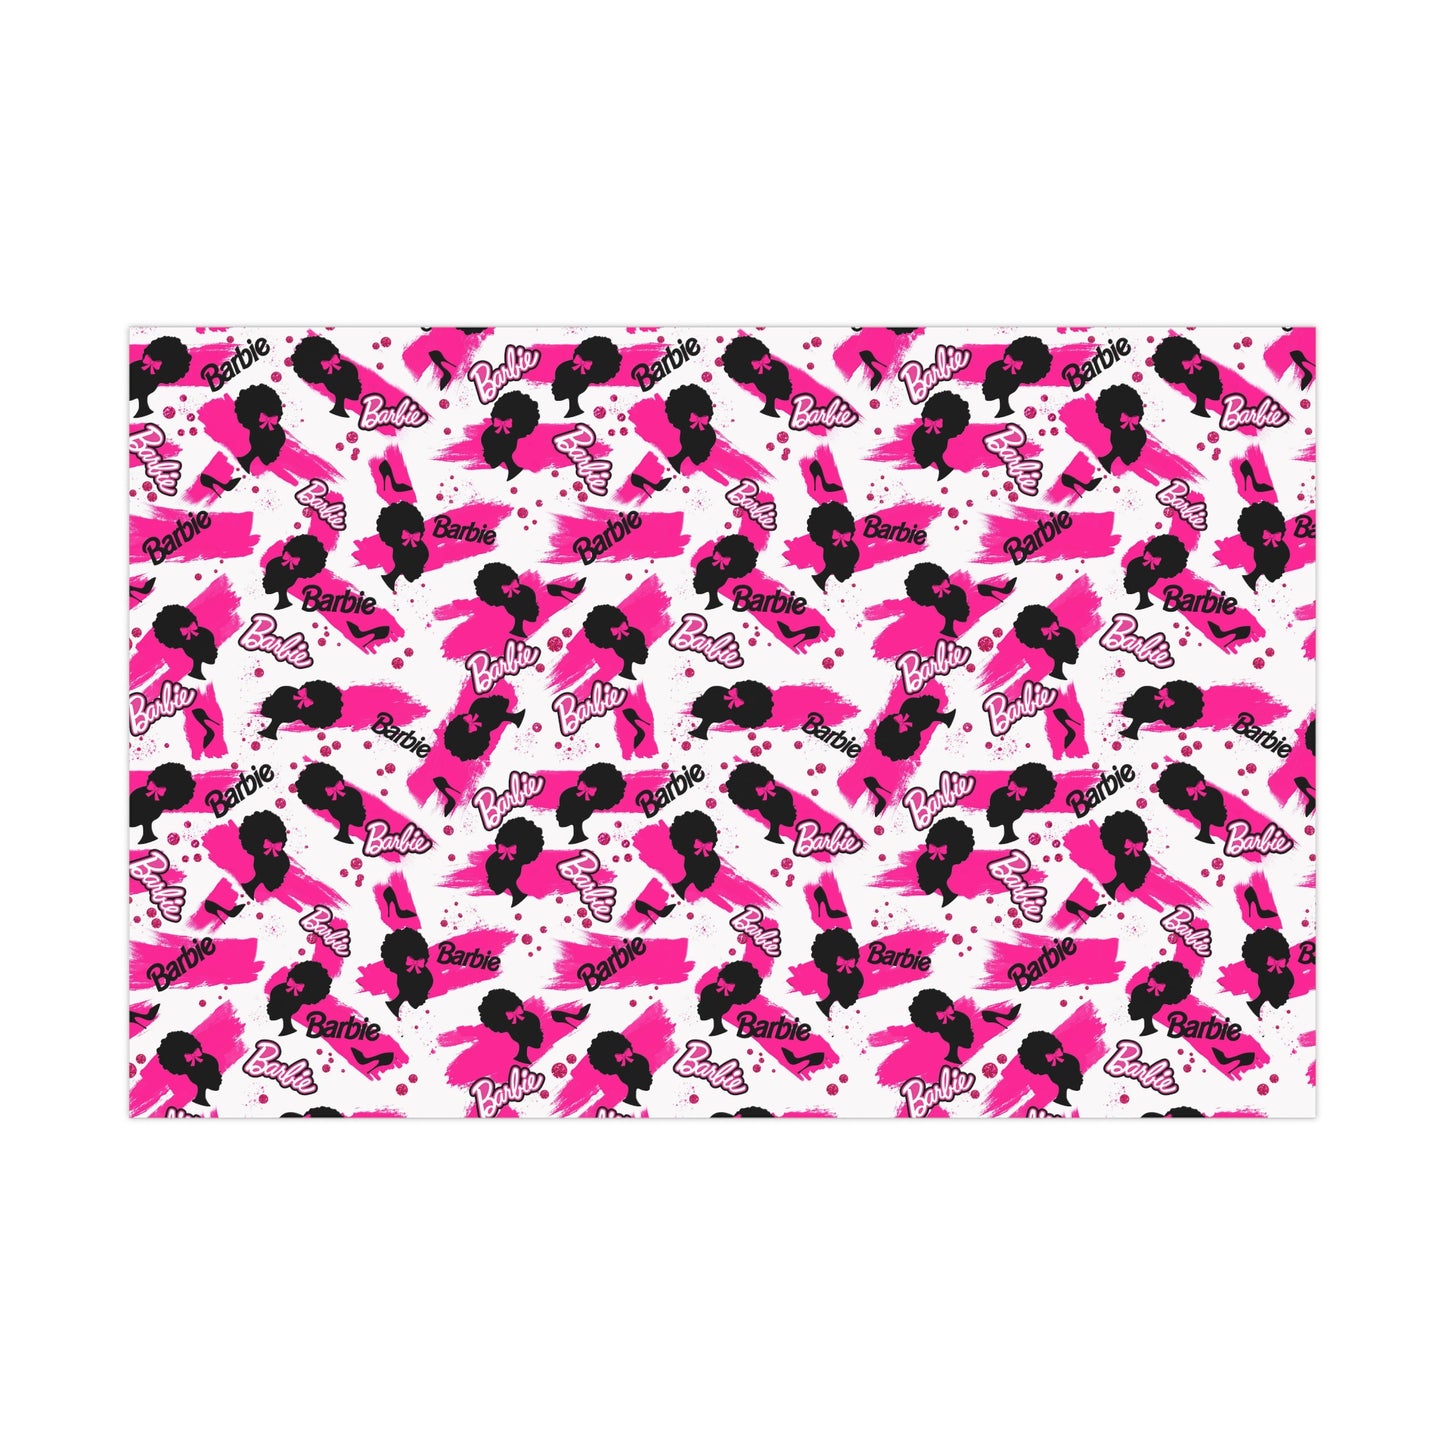 Black Barb Gift Wrap Papers